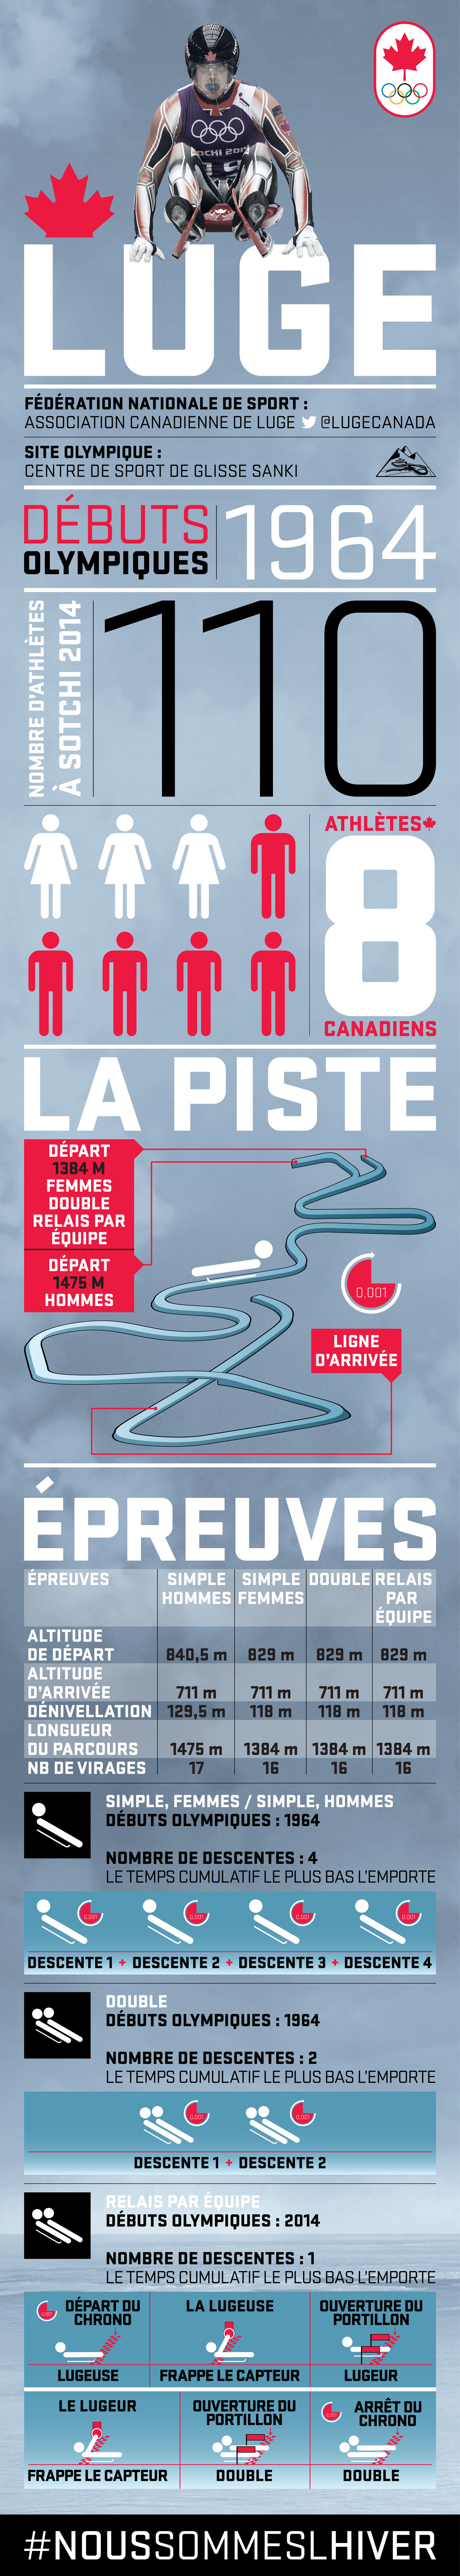 Luge_Infographic_FR